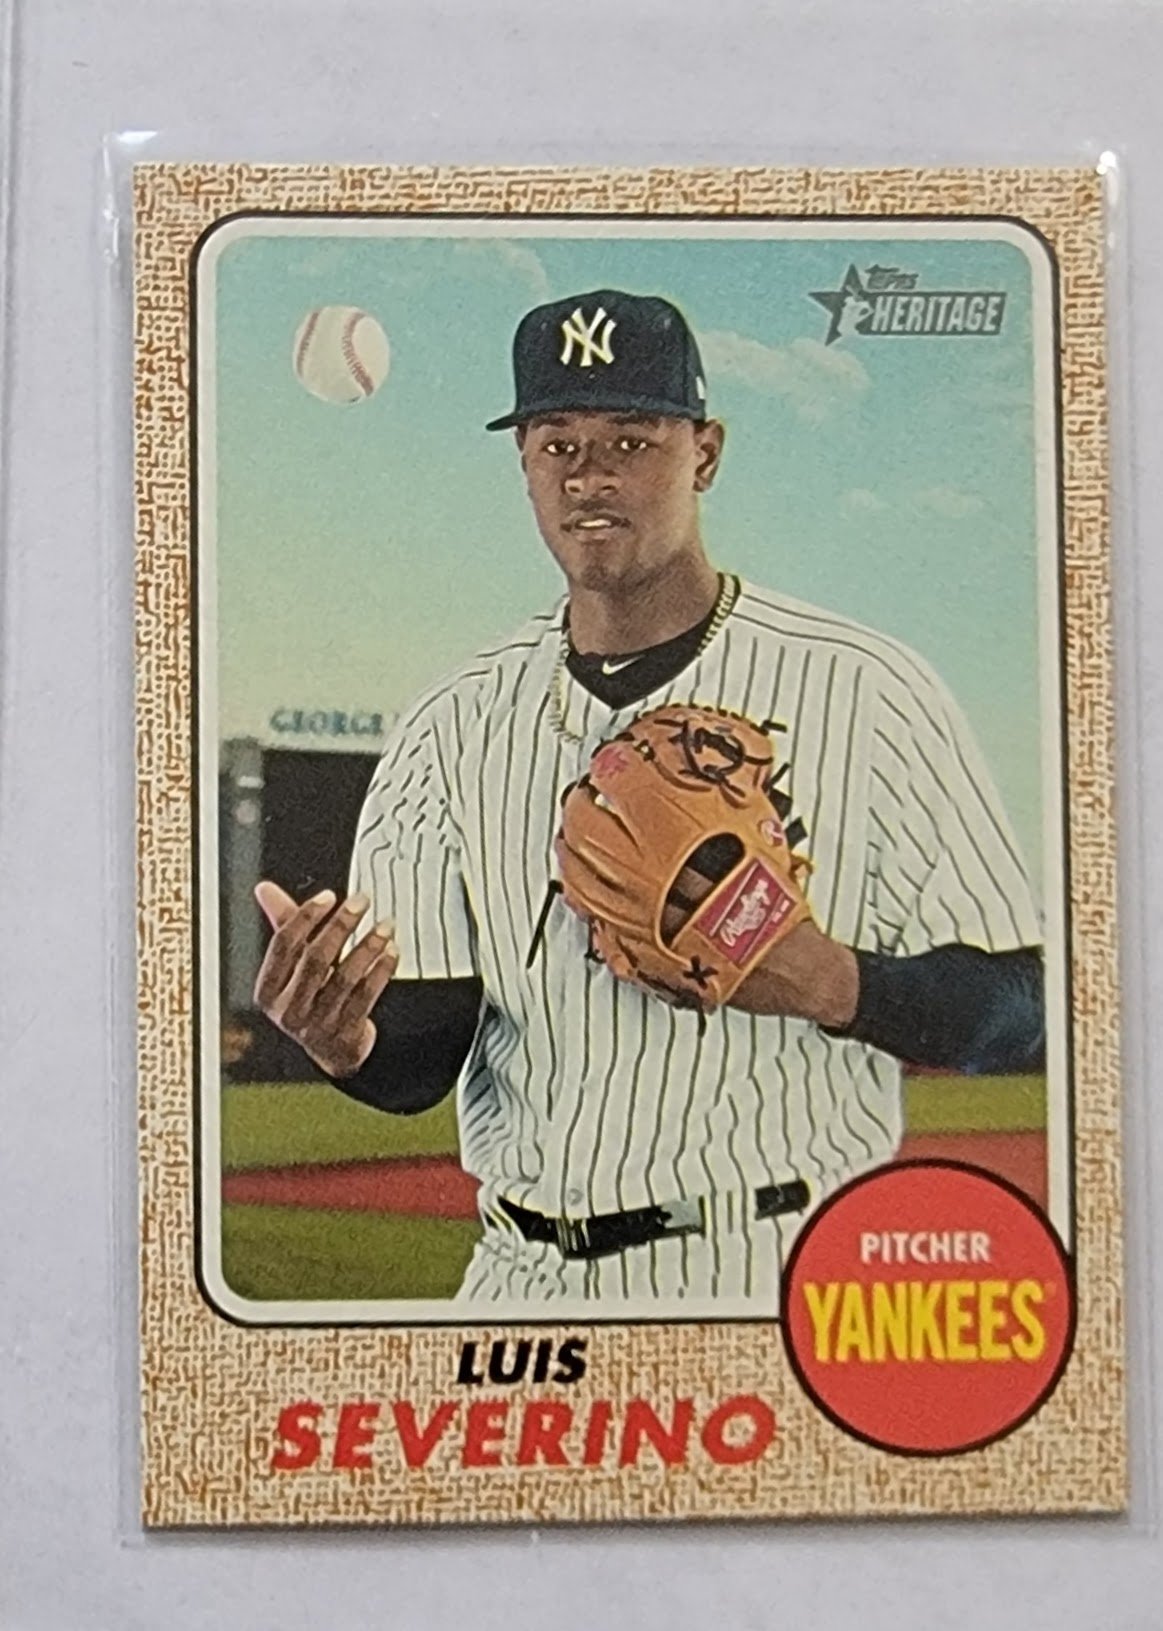 2017 Topps Heritage Luis Severino SP Baseball Trading Card TPTV simple Xclusive Collectibles   